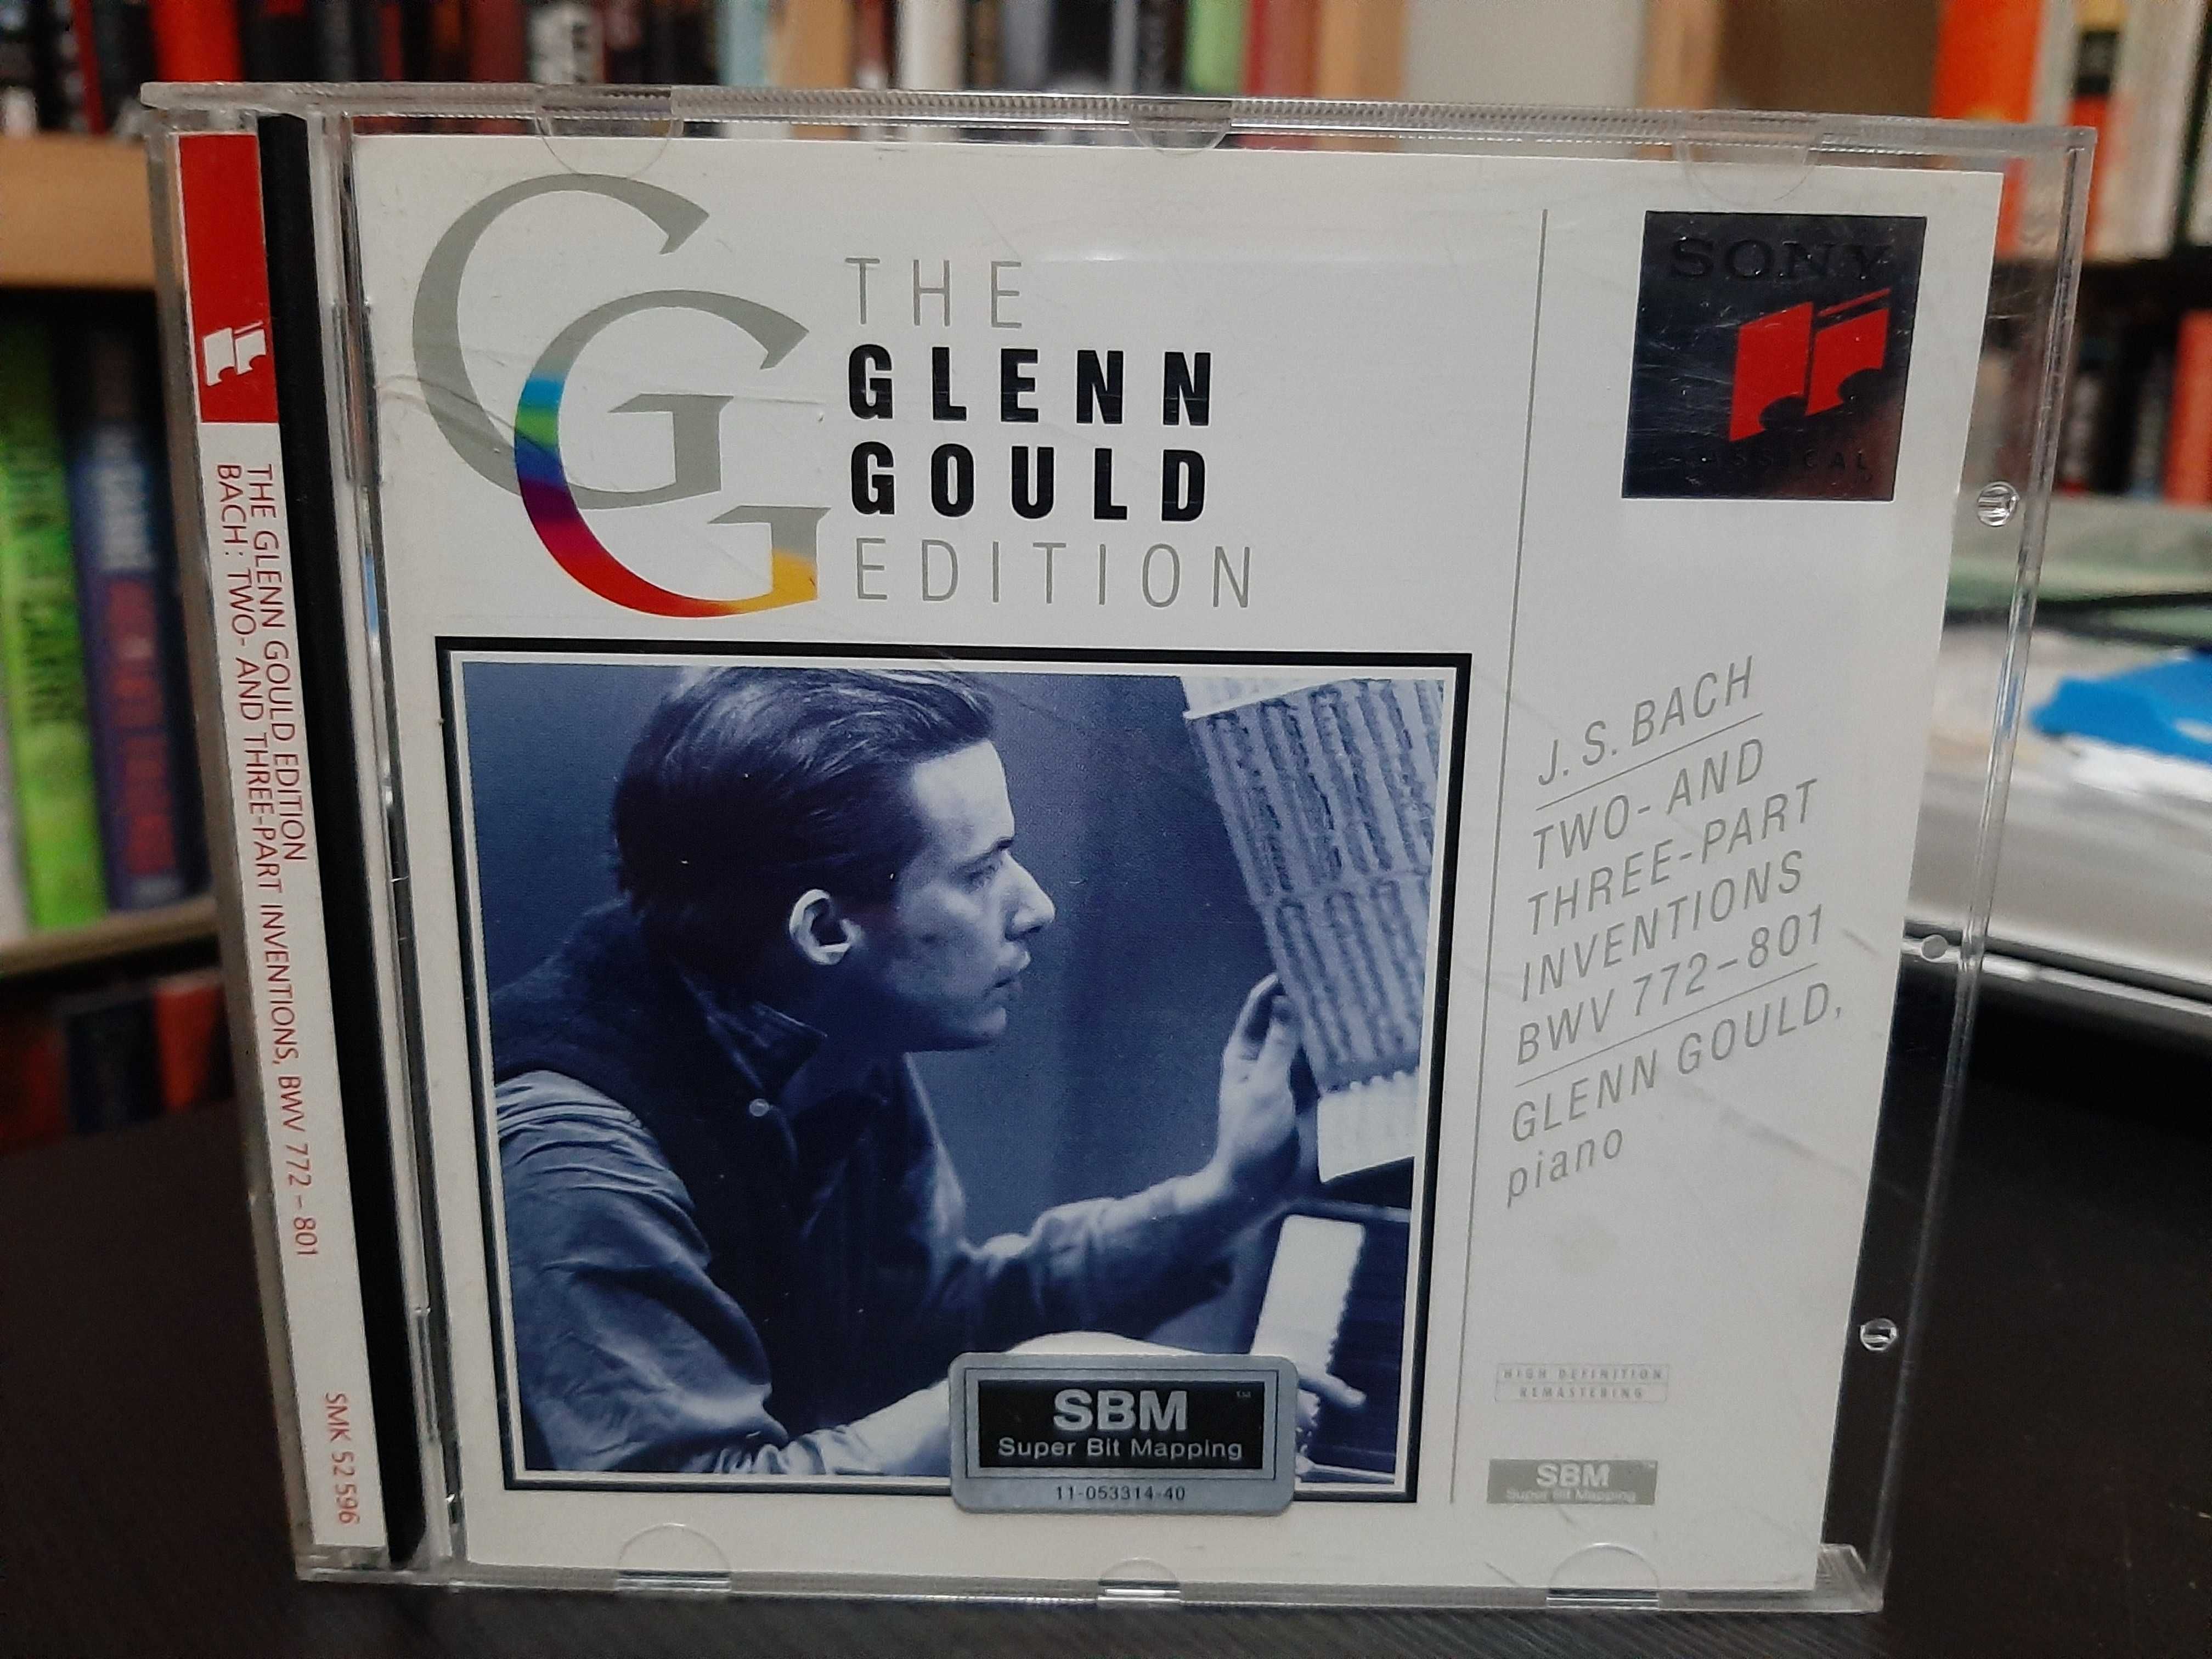 J. S. Bach – Two And Three-Part Inventions BWV 772–801 – Glenn Gould